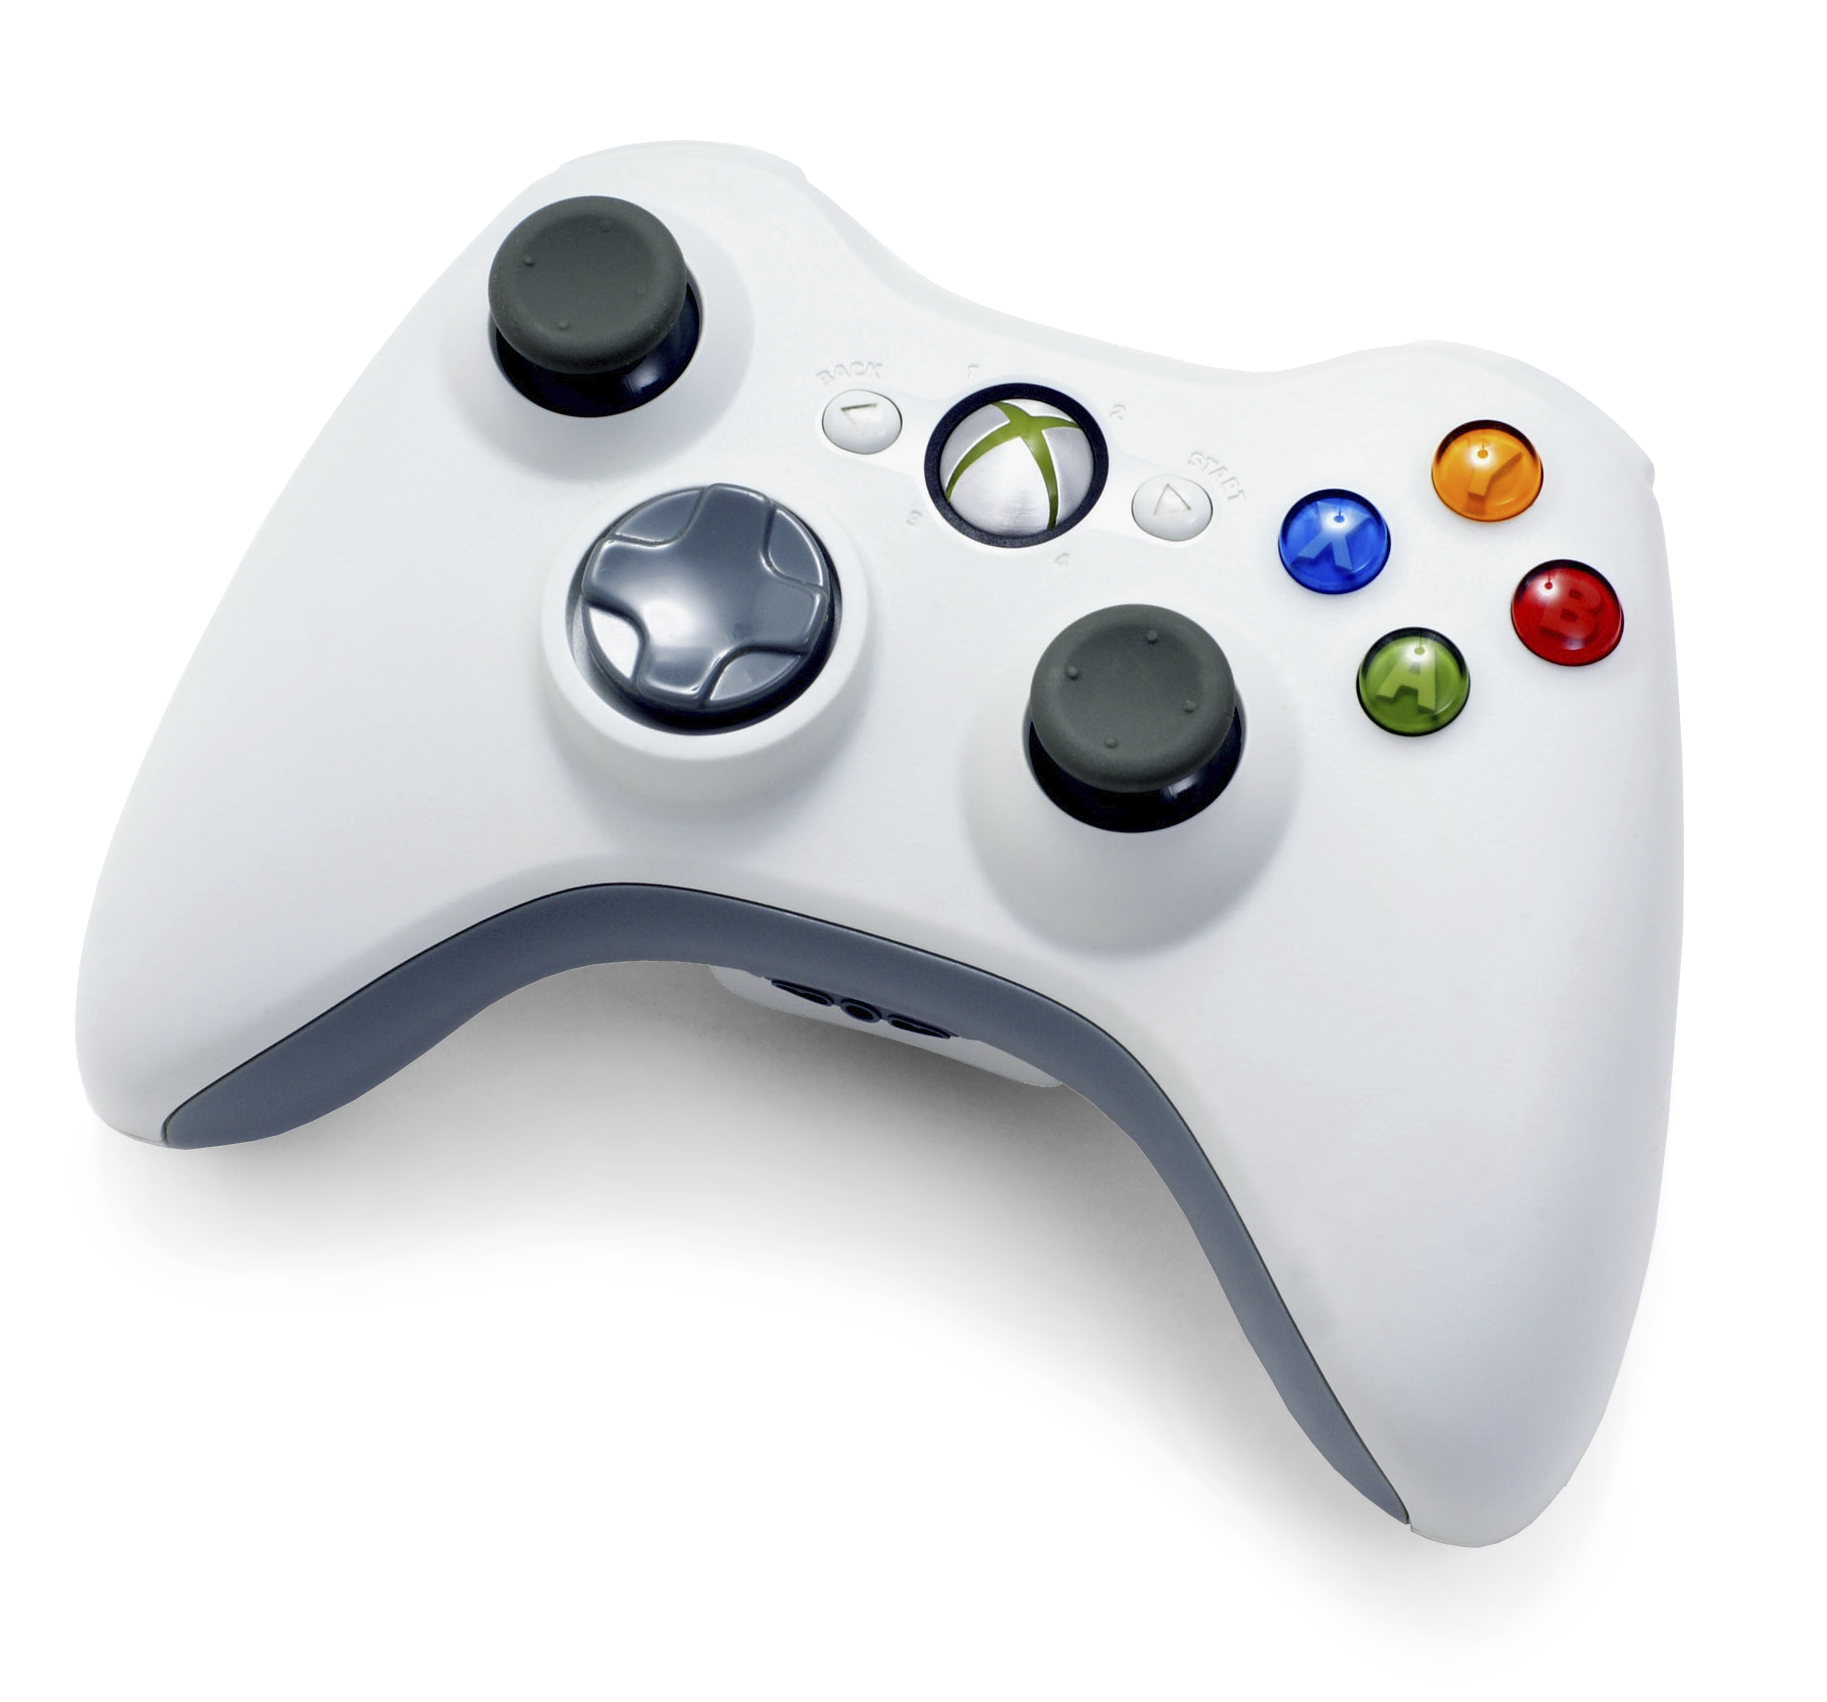 Xbox Controller PNG Photo